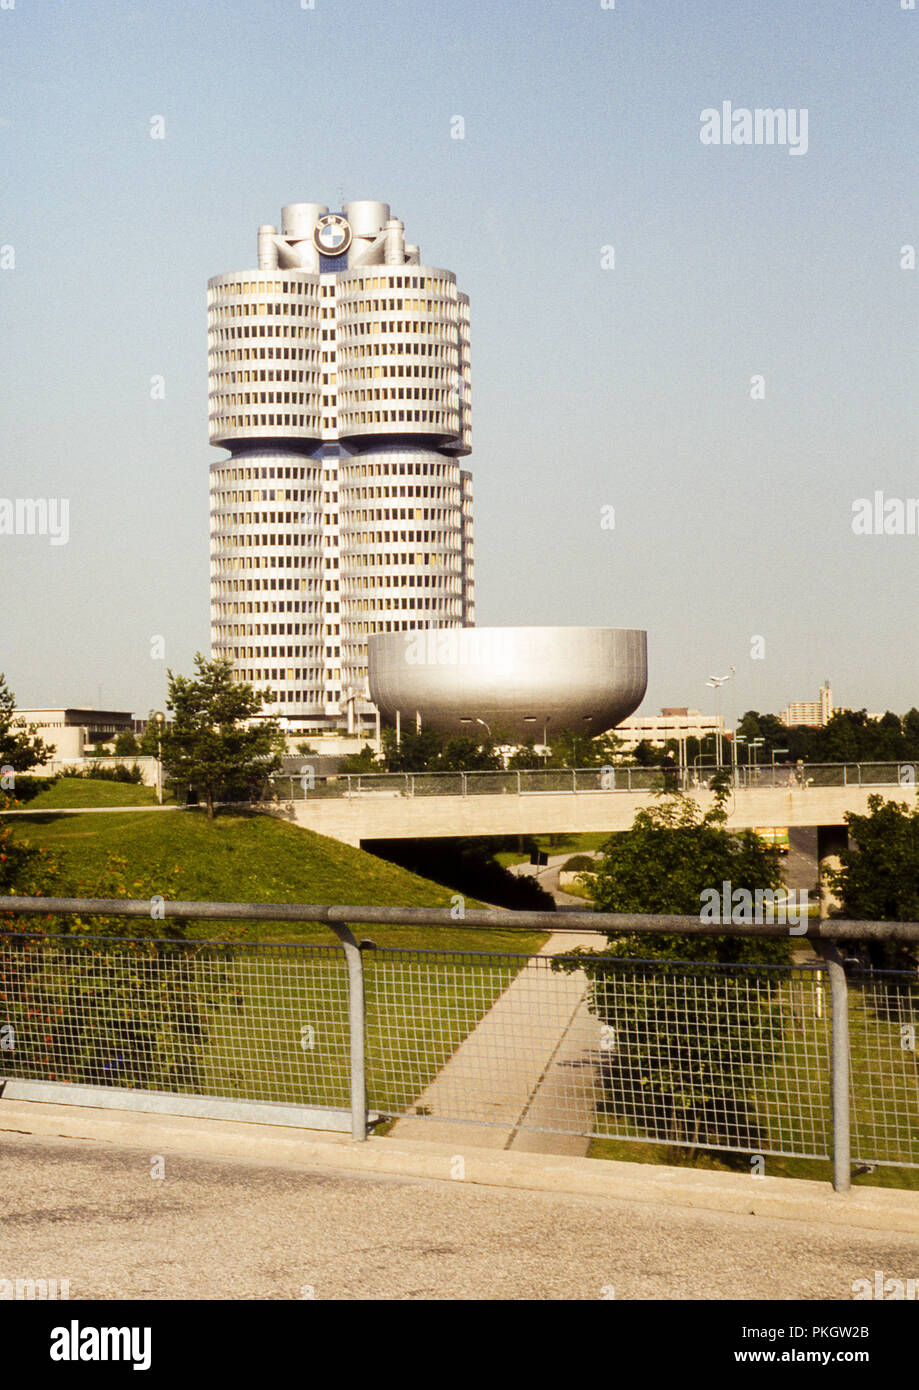 BMW Headquarters and Museum in Munich, Bavaria, Germany. Original archive image taken in 1979 on 35mm colour slide film. Stock Photo